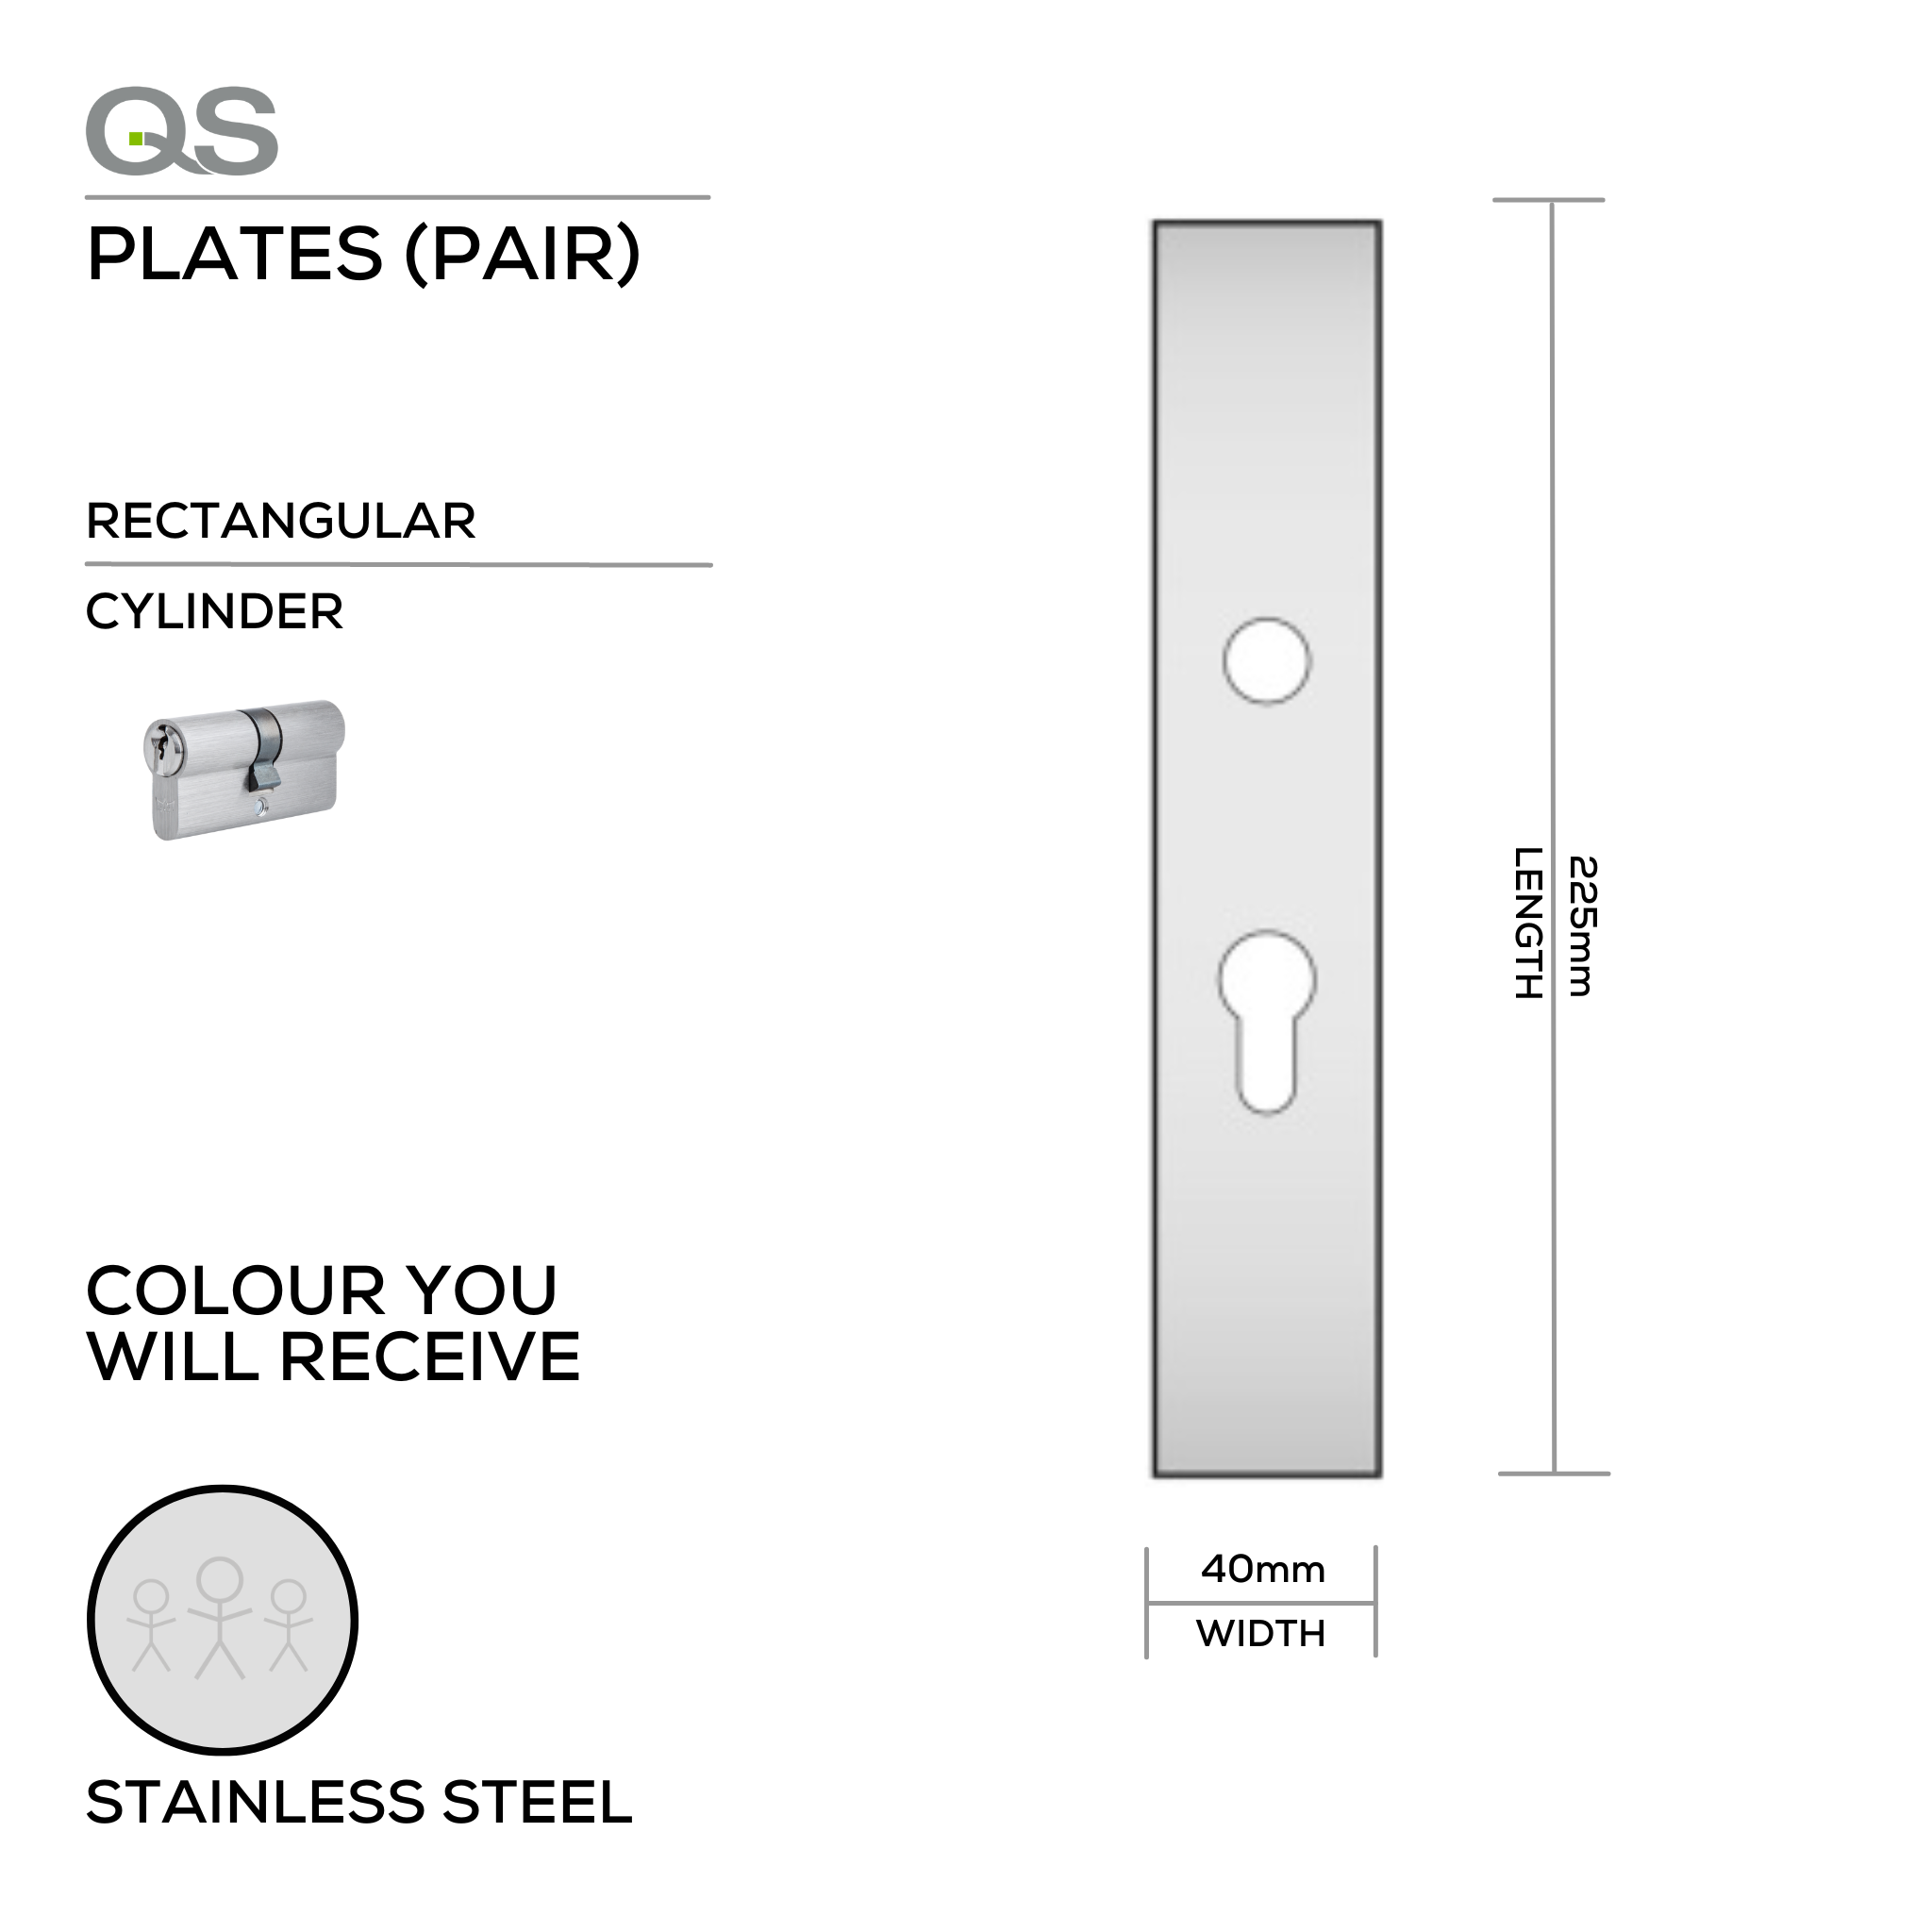 QS4429 CYL, Plate, Rectangular, 225mm (l) x 40mm (w), Supplied with QS Handle (Price if purchasing a Qs handle at same time), Stainless Steel, QS